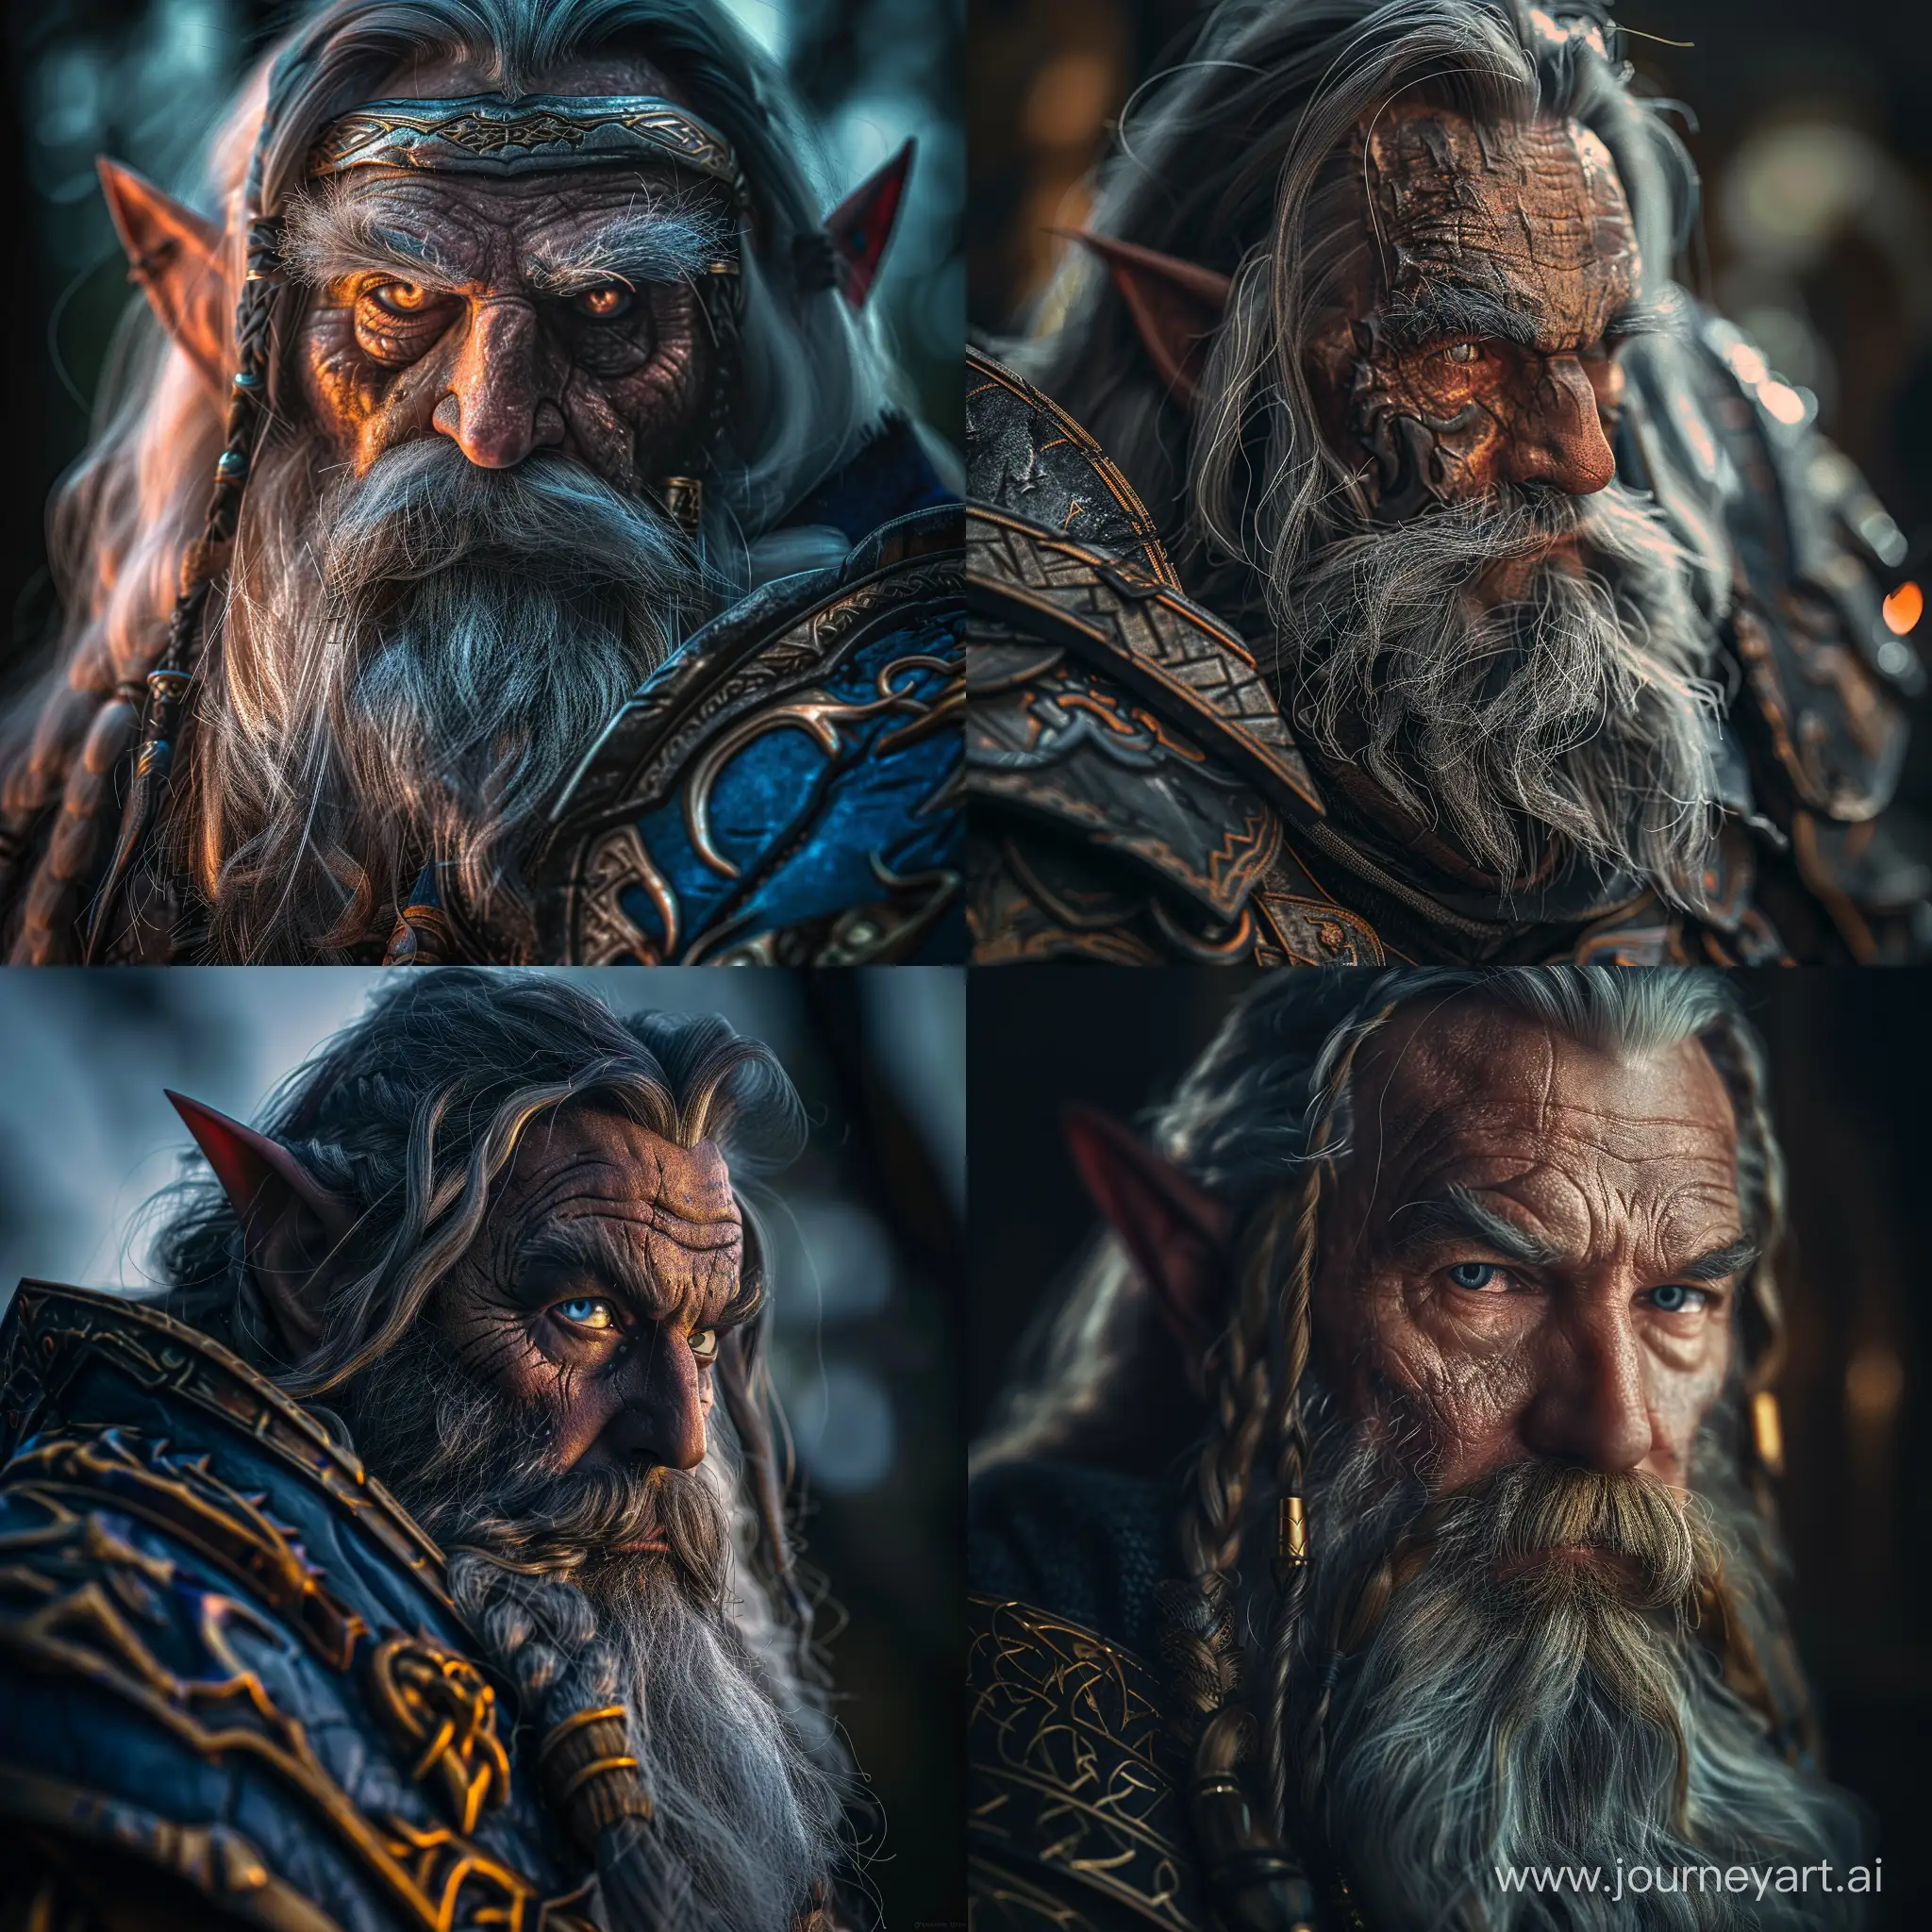 world of warcraft Uther the Lightbringer character, ultra realistic, hyber detailed, portrait photo. use sony a7 II camera with an 30mm lens fat F.1.2 aperture setting to blur the background and isolate the subject. use distinctive lighting on the subjects shot. The image should be shot in ultra-high resolution. --v 6